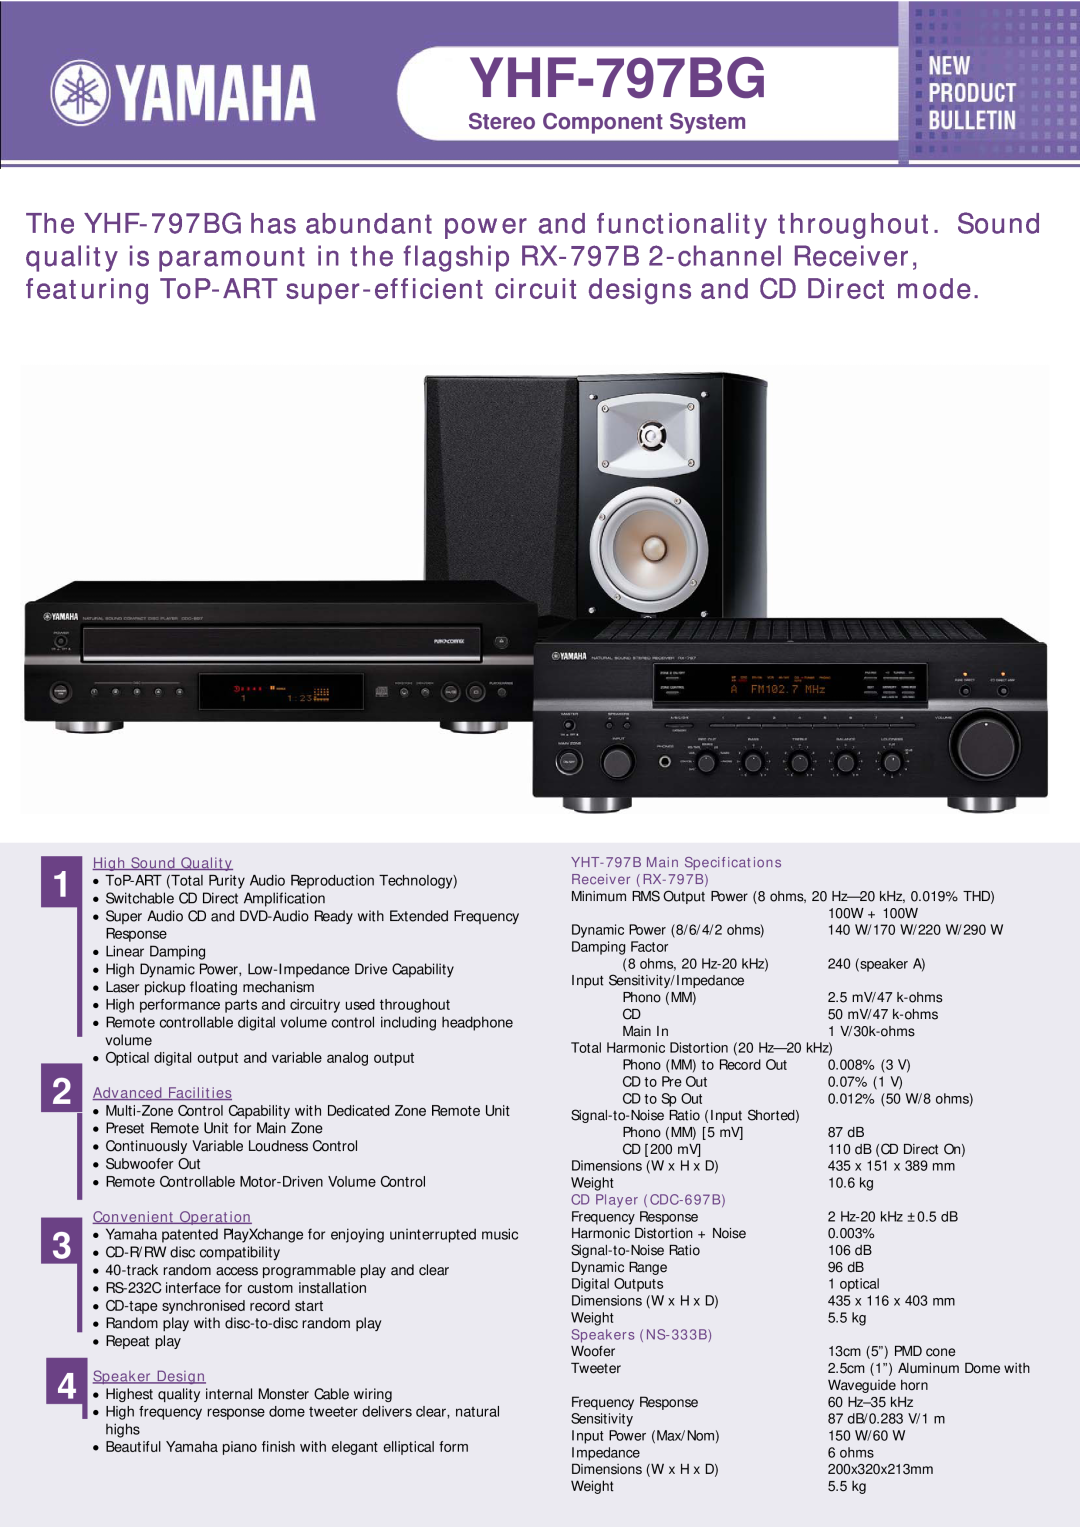 Yamaha YHF-797BG specifications Stereo Component System, High Sound Quality, Advanced Facilities, Convenient Operation 